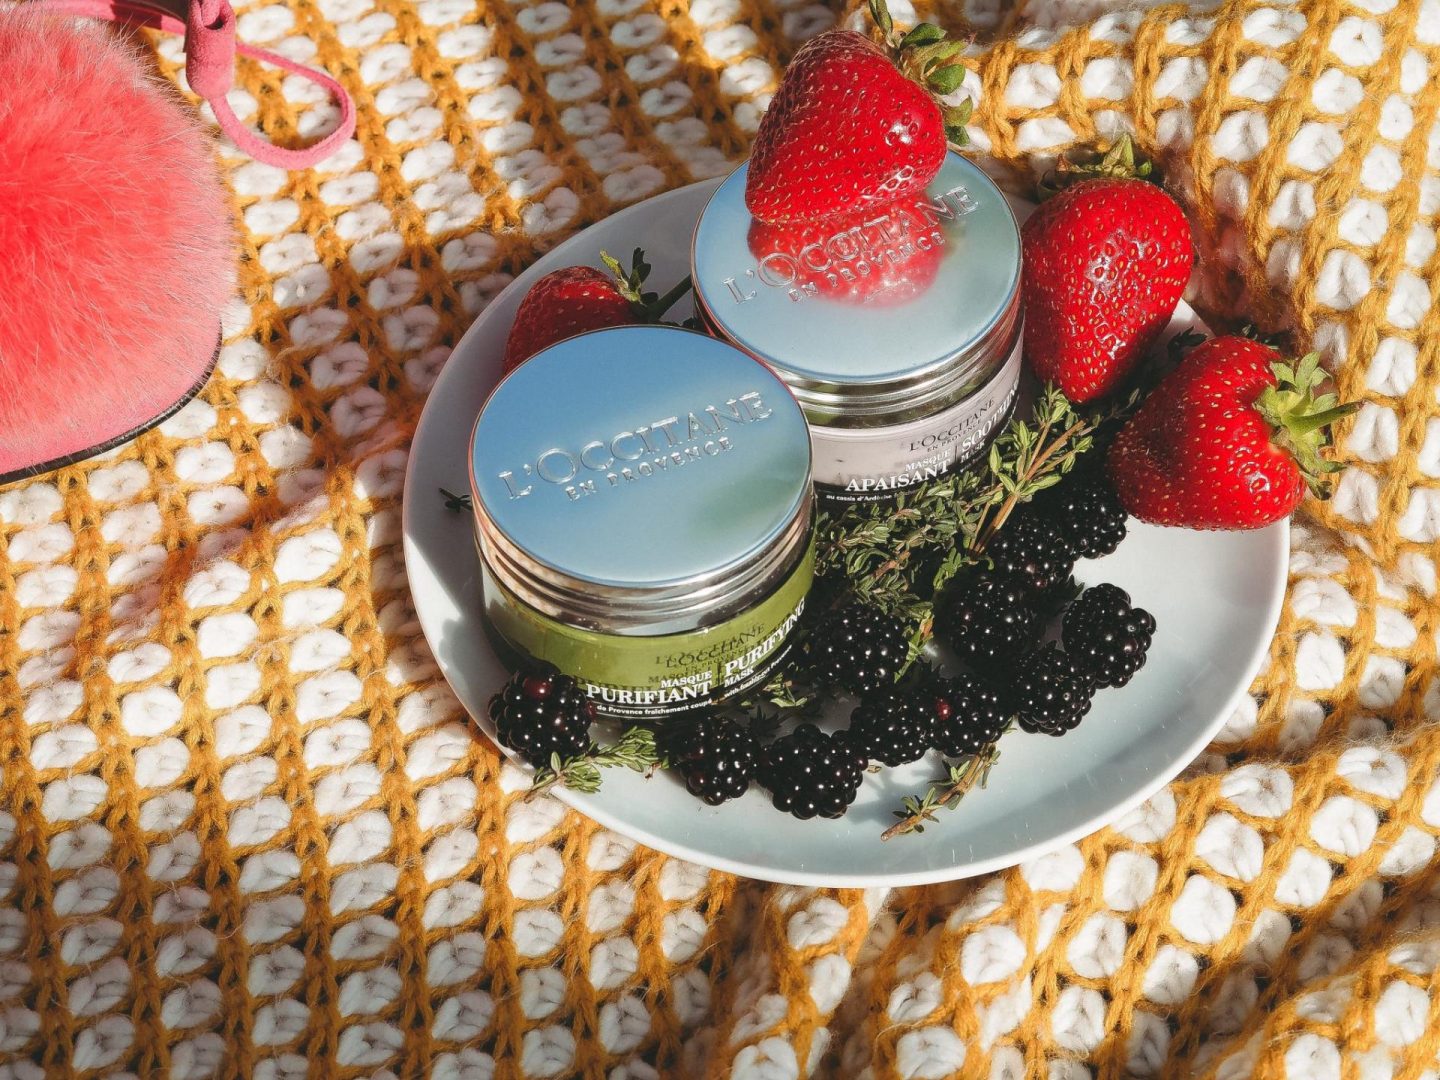 Enjoy a fruity beauty injection with L'Occitane